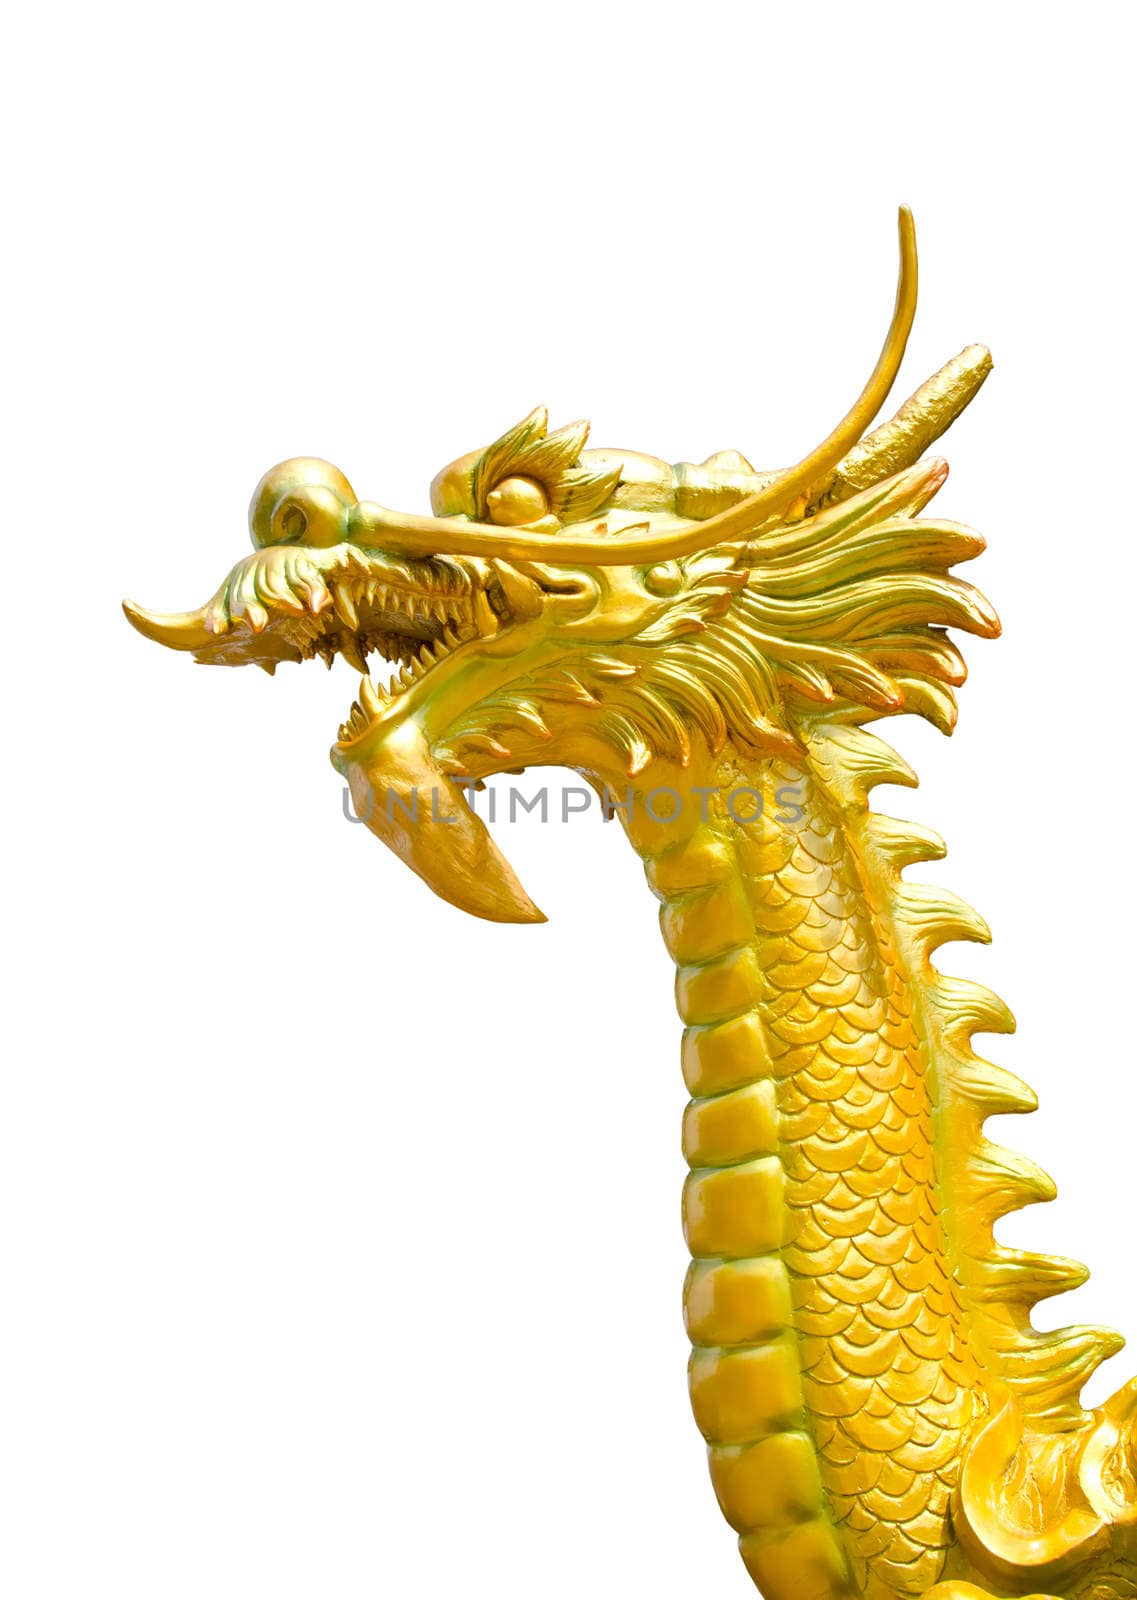 The Head of GoldenDragon statue isolated on white background. clipping path.